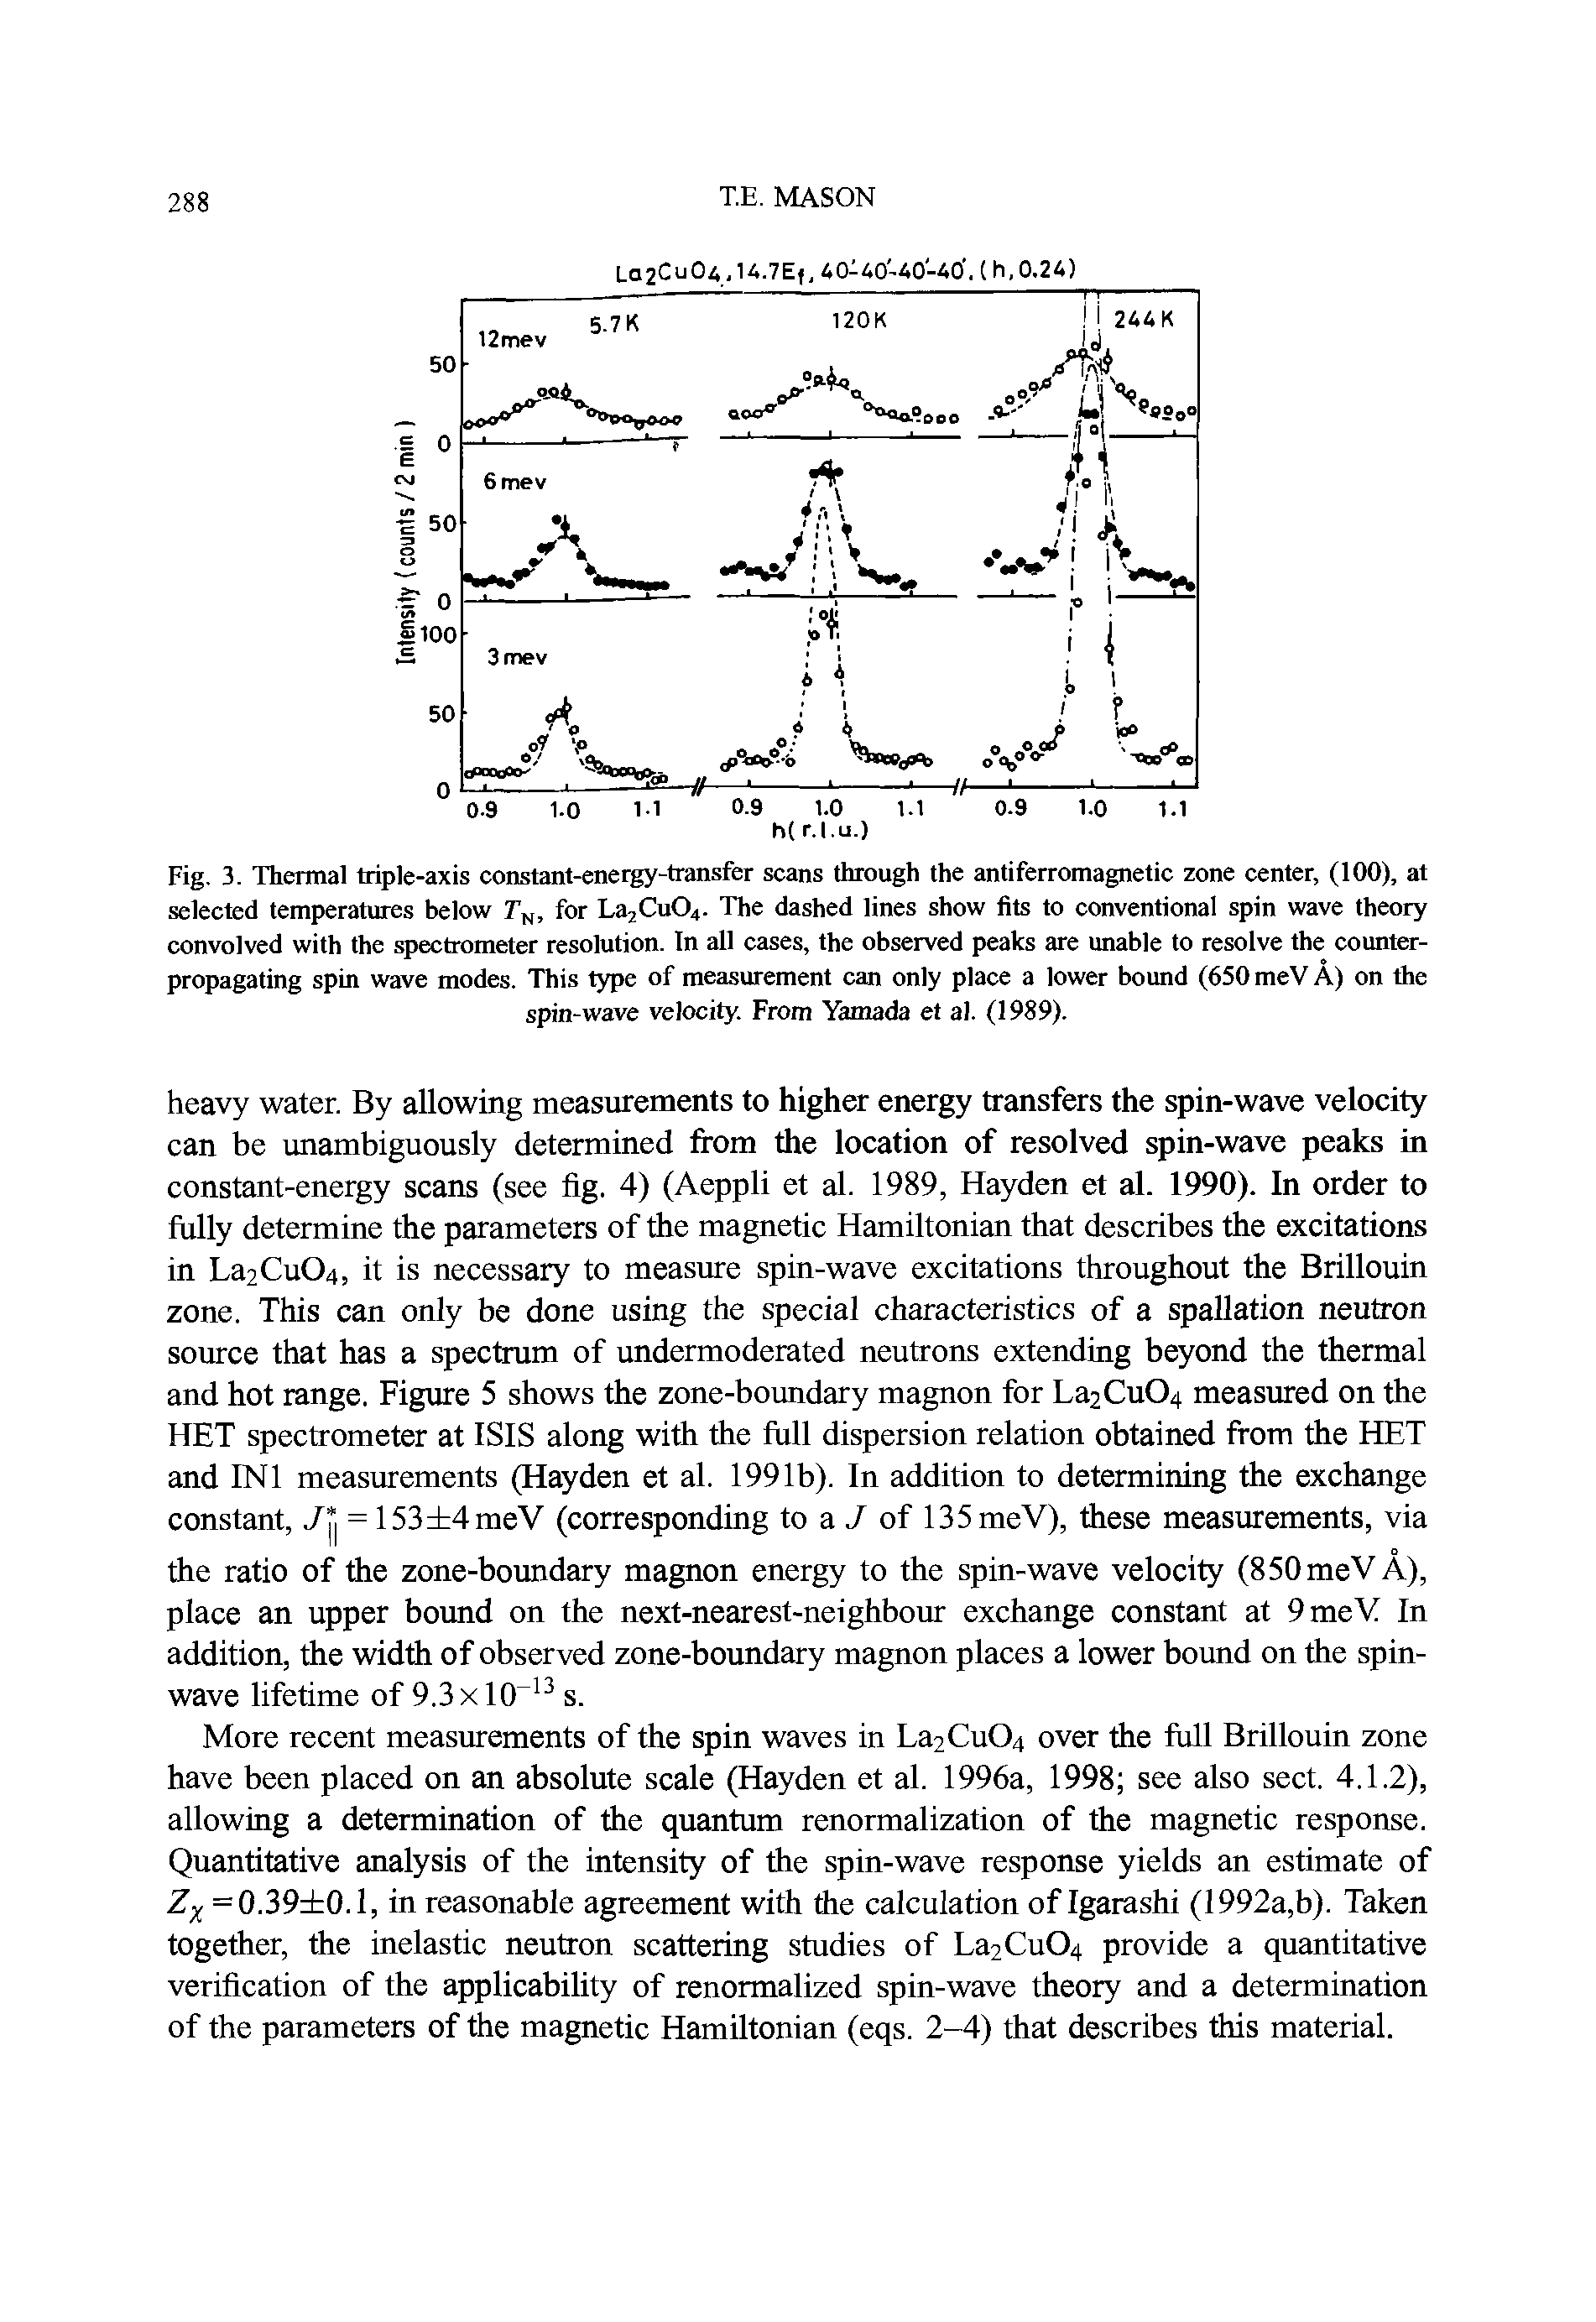 Fig. 3. Thermal triple-axis constant-energy-transfer scans through the antiferromagnetic zone center, (100), at selected temperatures below Tf, for La2Cu04- The dashed lines show fits to conventional spin wave theory convolved with the spectrometer resolution. In all cases, the observed peaks are unable to resolve the counter-propagating spin wave modes. This type of measurement can only place a lower bound (650 meV A) on the spin-wave velocity. From Yamada et al. (1989).